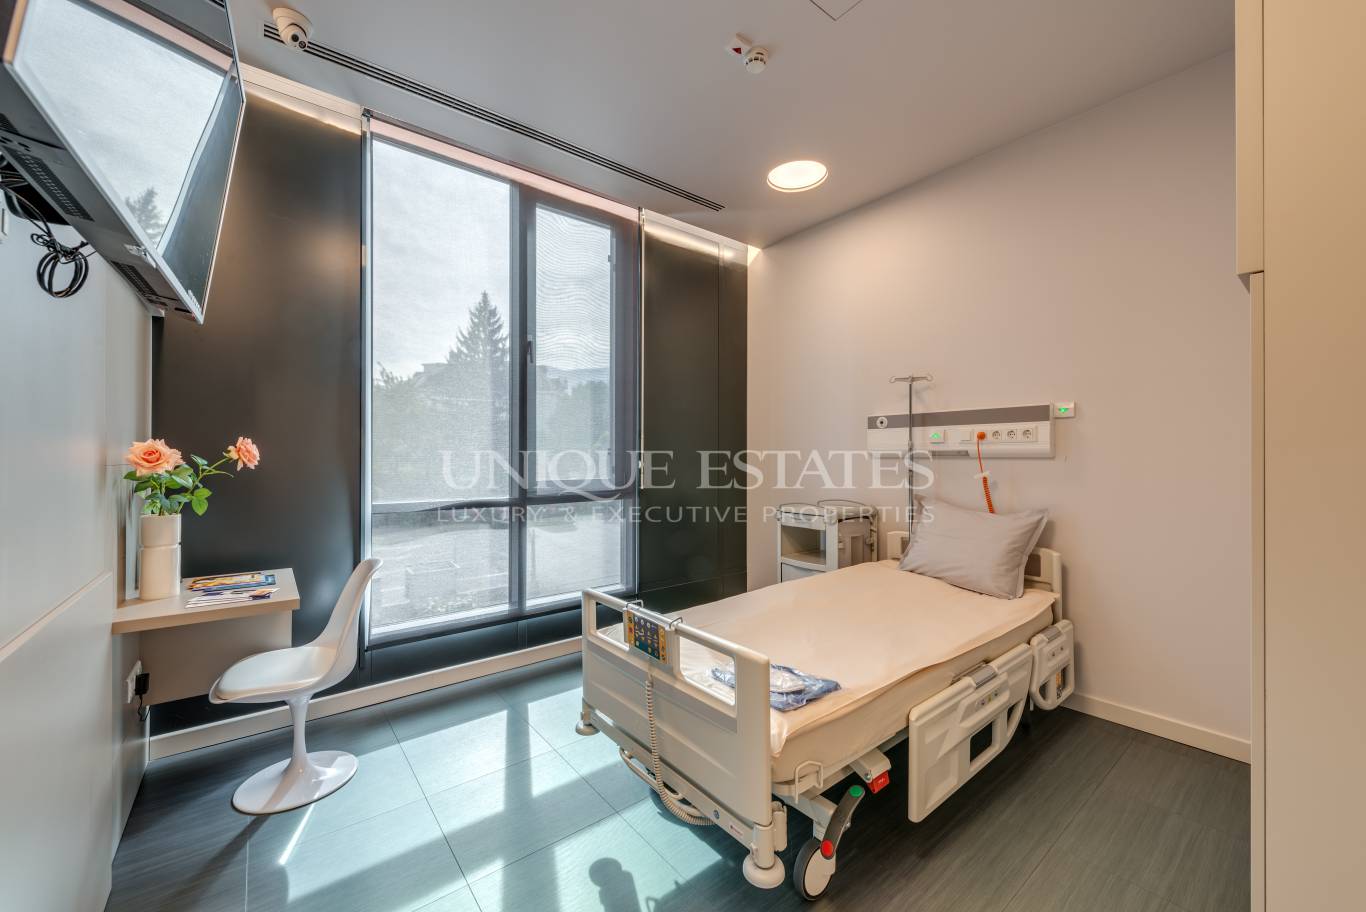 Clinic for sale in Sofia, Vitosha with listing ID: K14475 - image 10